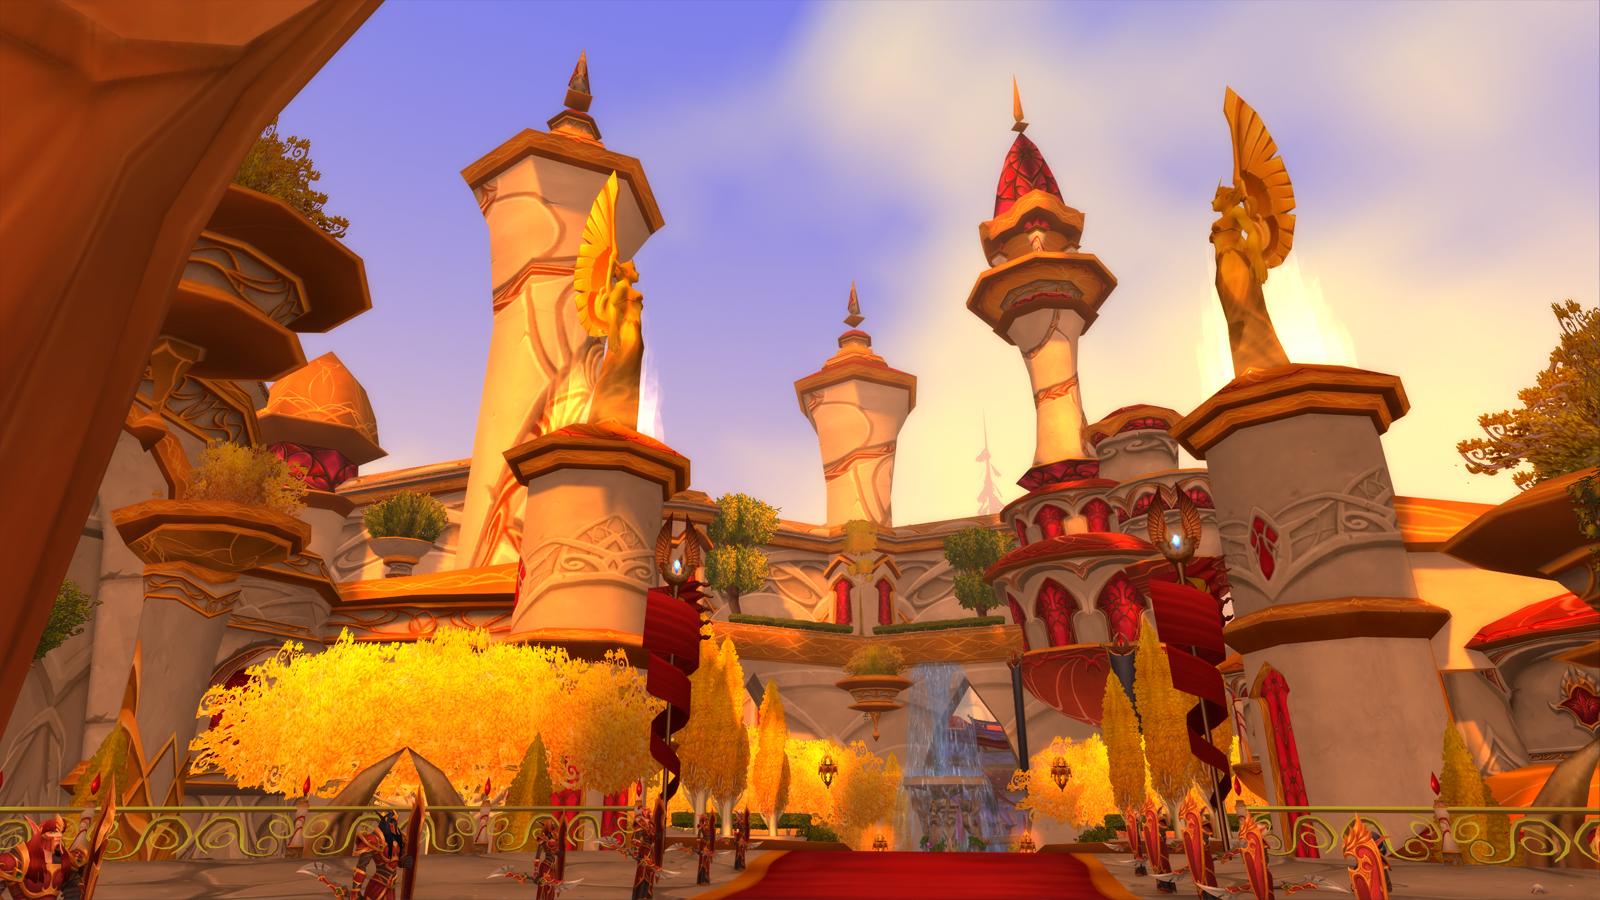 Silvermoon City from The Burning Crusade in WoW, bathed in sunlight